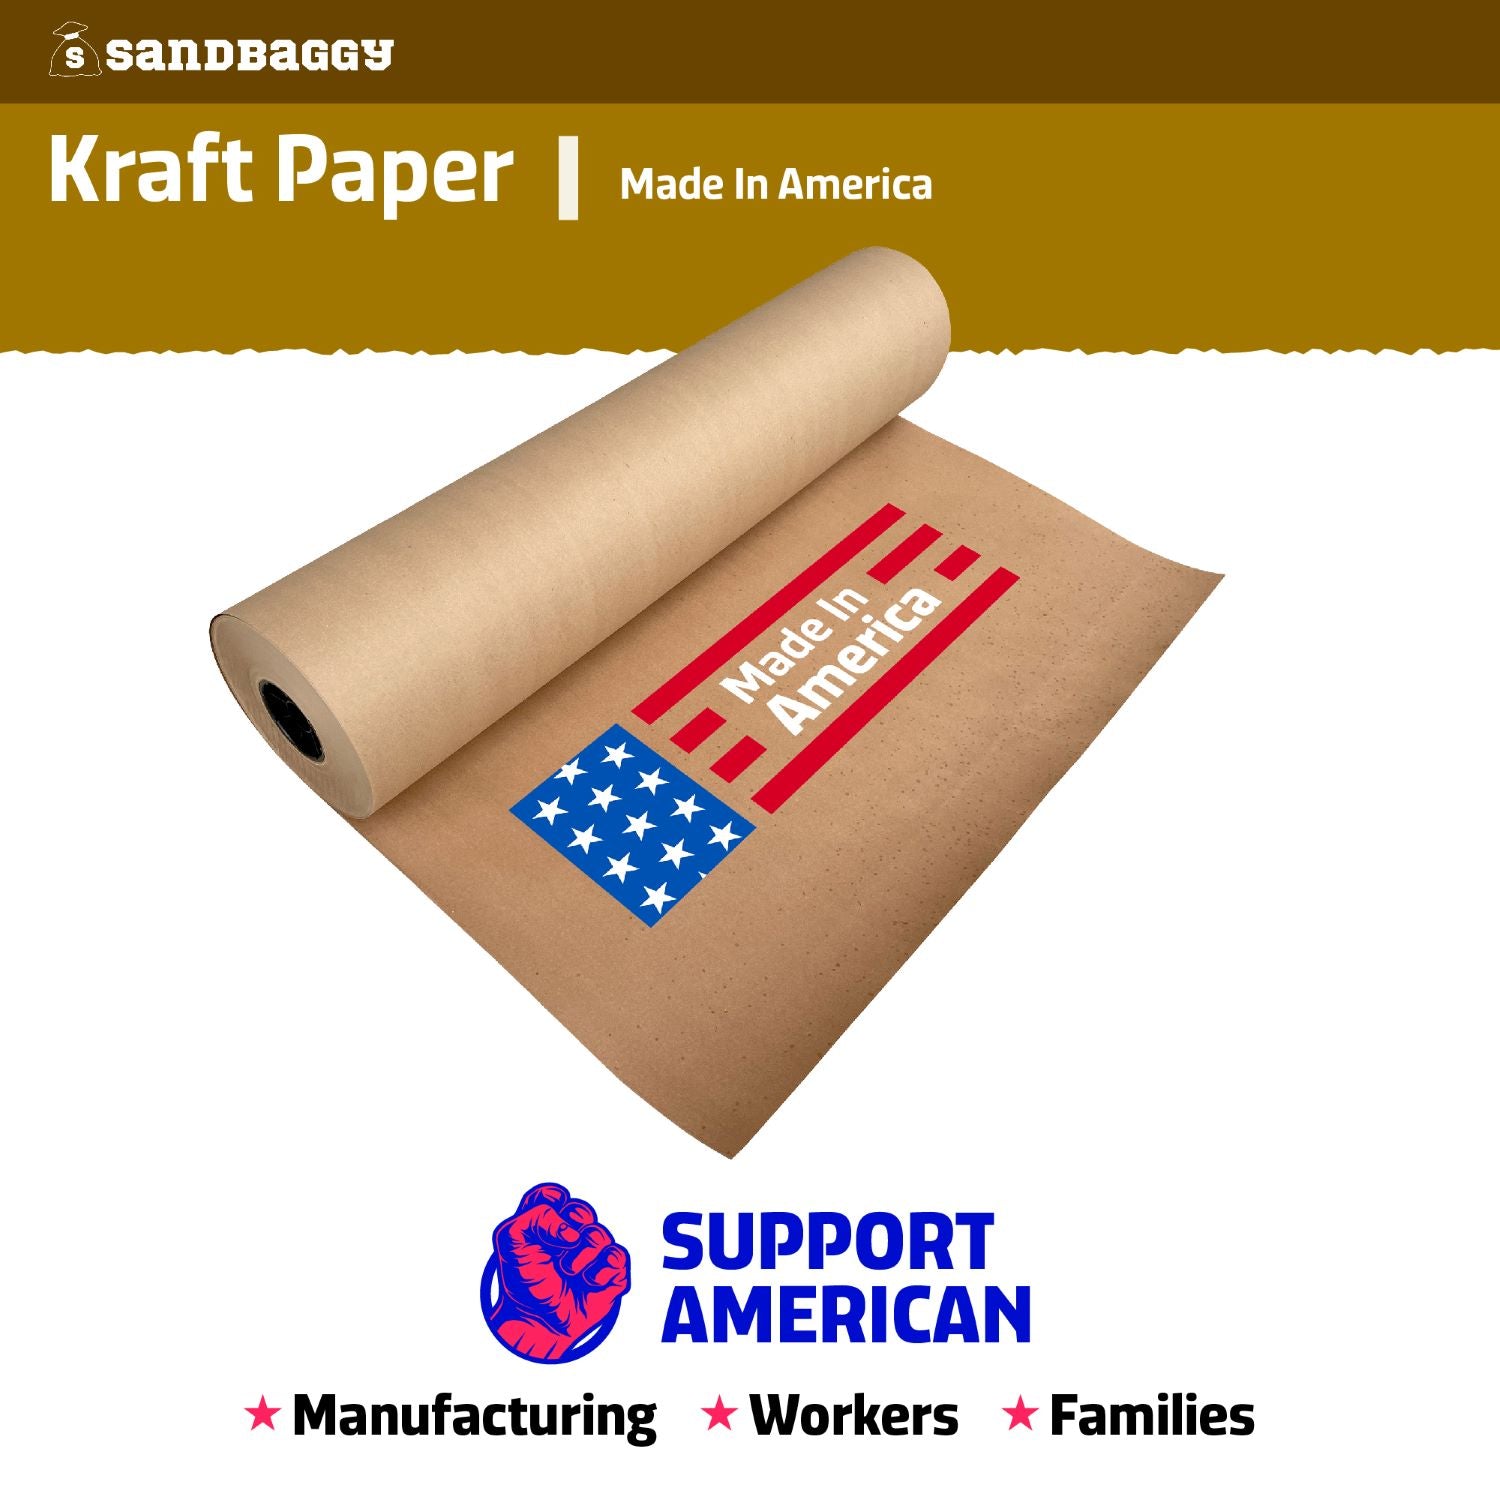 24 x 250 ft Brown Kraft Paper Recycled Roll Packaging Shipping Wrapping